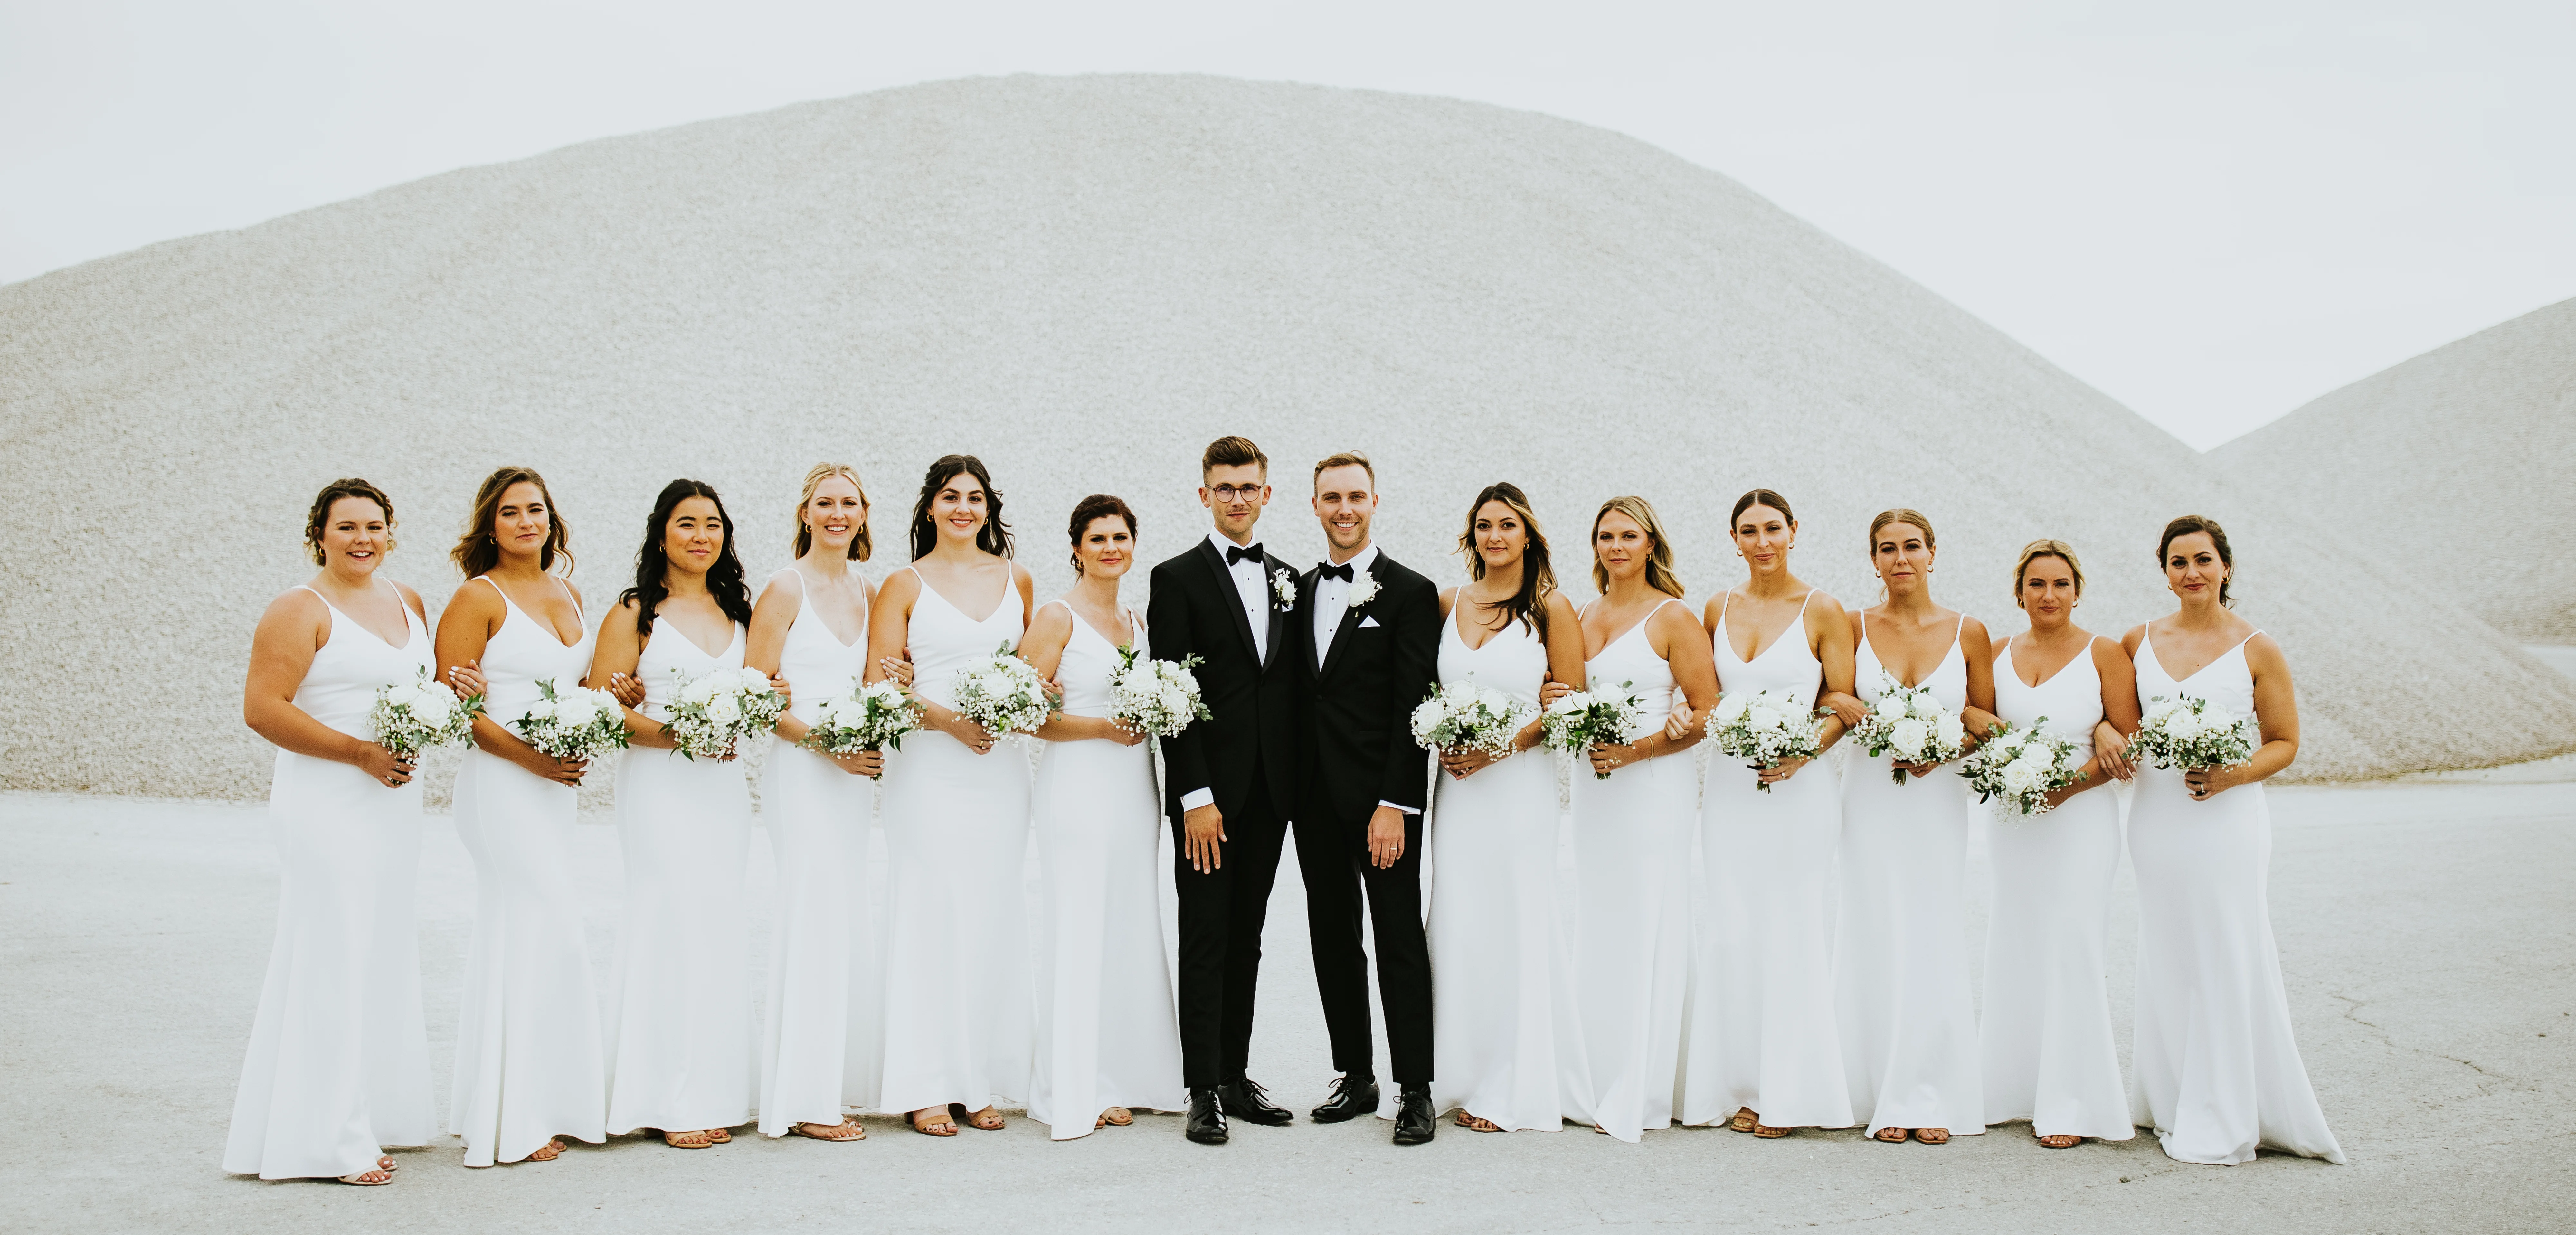 two grooms wearing black tuxes standing between their bridesmaids wearing white